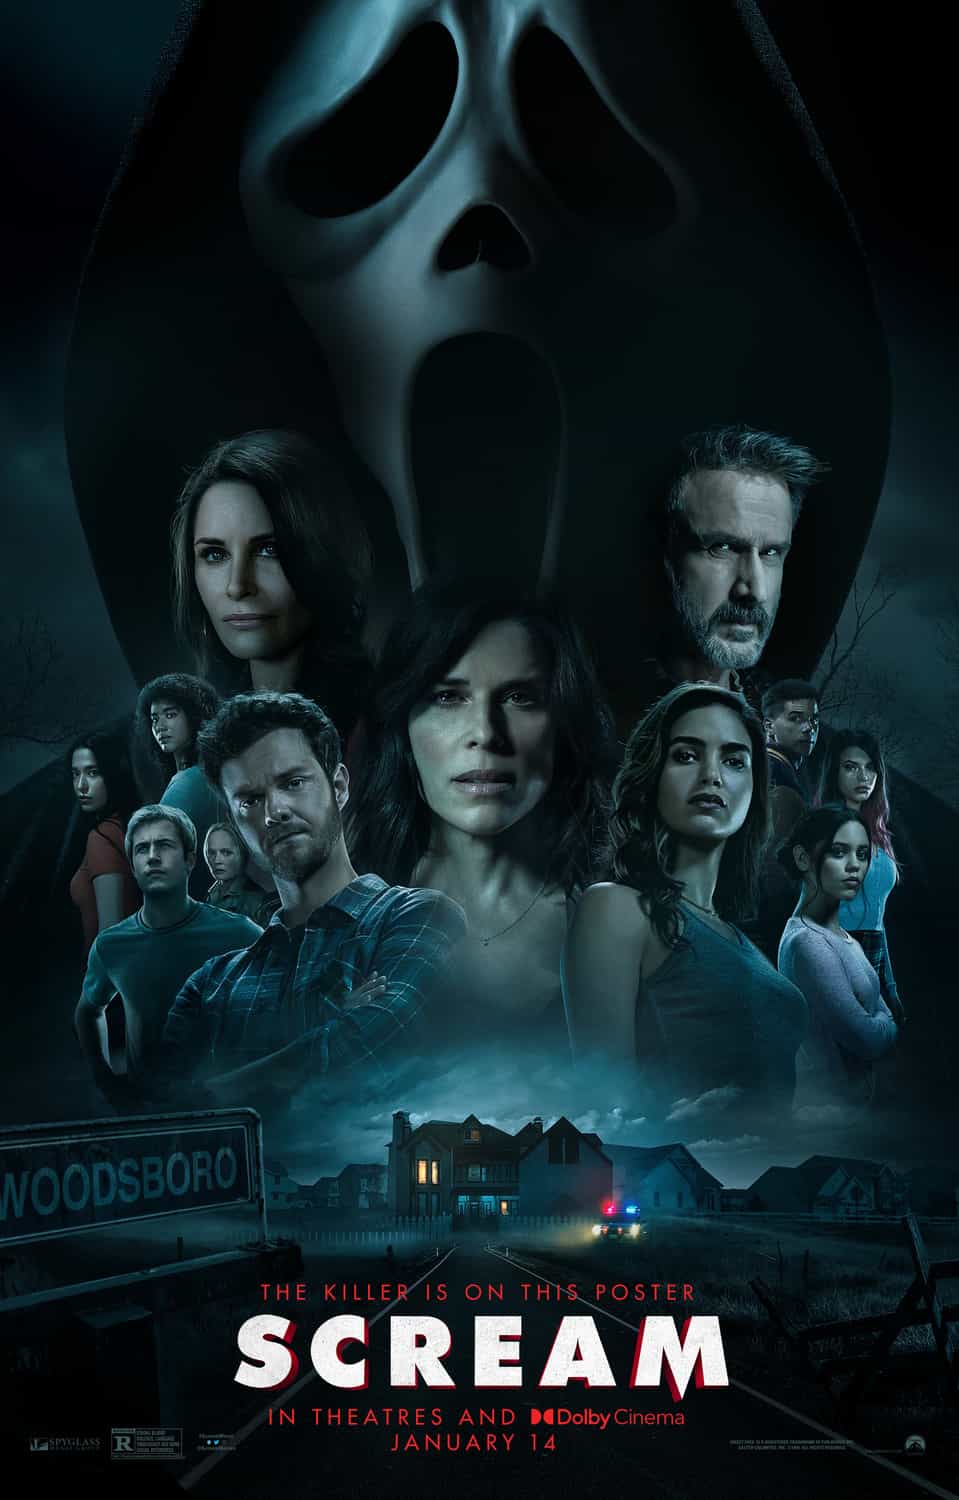 US Box Office Figures 14th - 16th January 2022:  Scream on its debut takes over from Spider-Man at the top of the North American box office